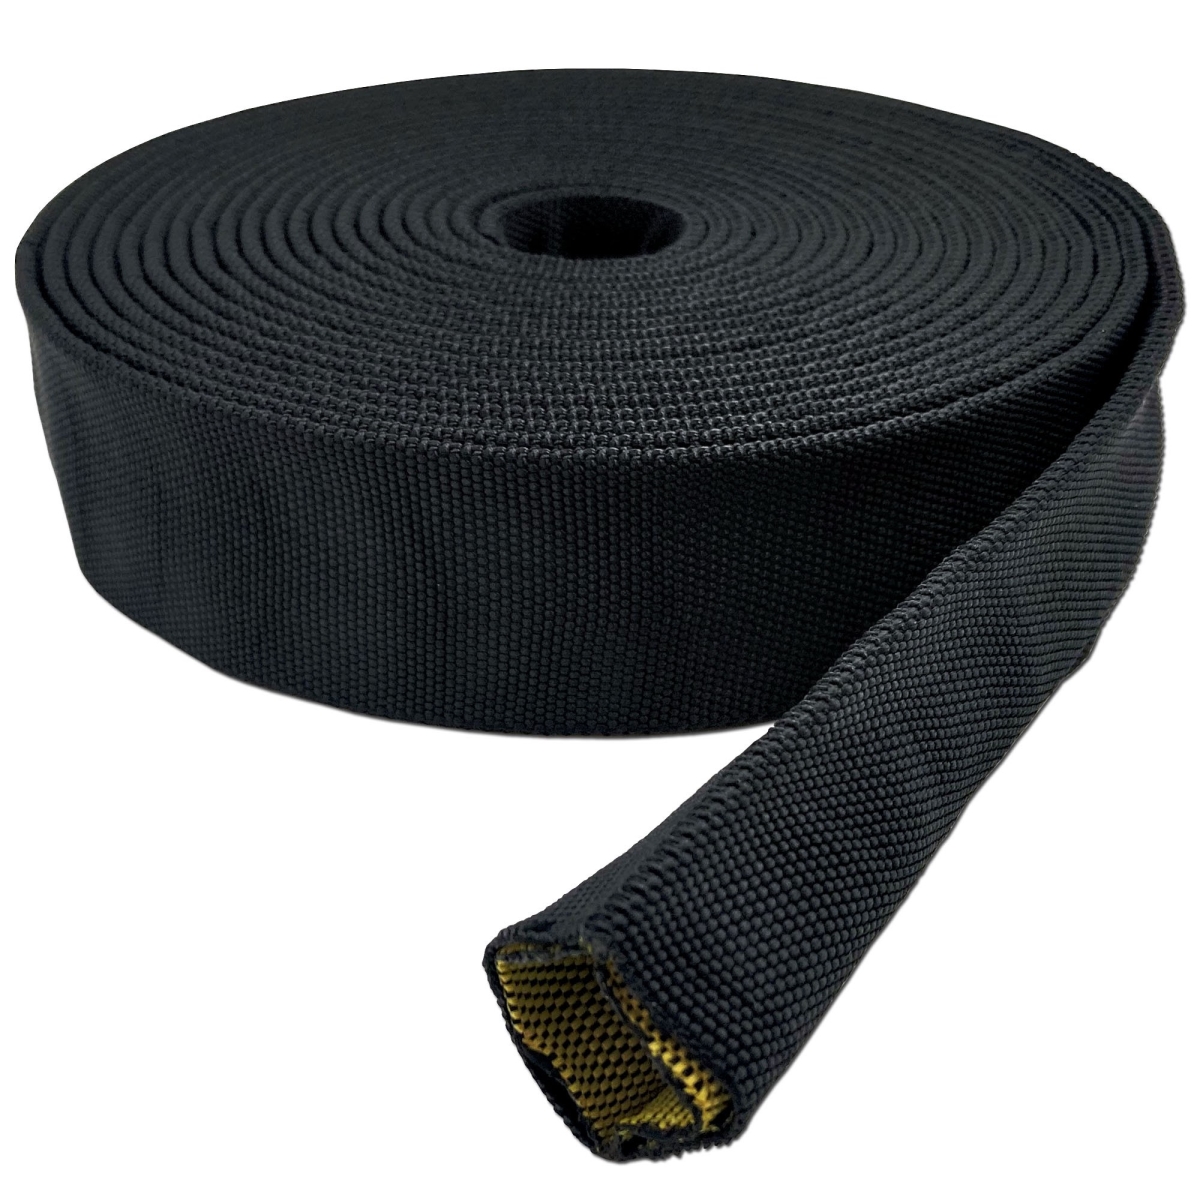 Picture of Electriduct BS-J-BURST-300-10-BK 3 in. x 10 ft. Burst Protection Multifilament Nylon Braided Sleeving - Black